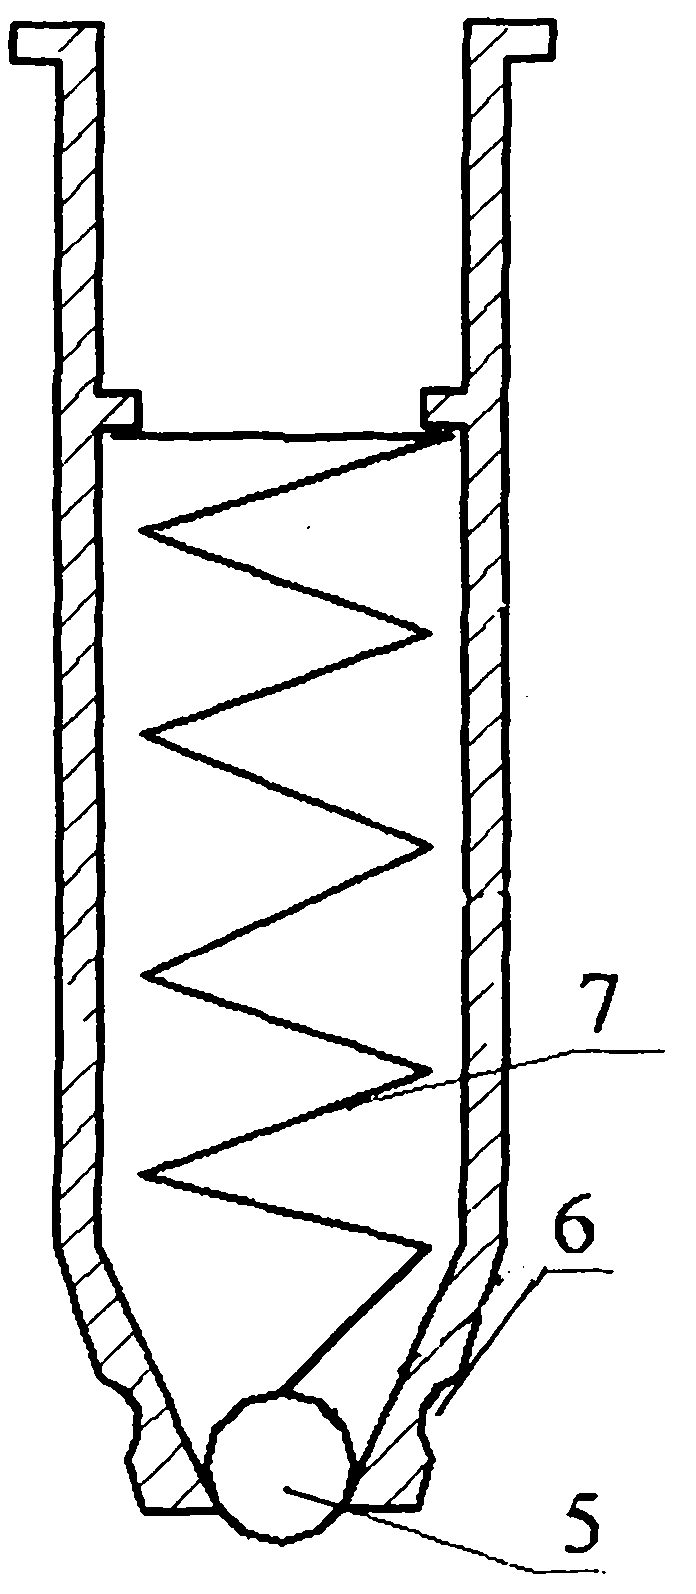 Anchoring structure for liquid-injection corrosion-resistant anchor rod or anchor cable and construction method thereof